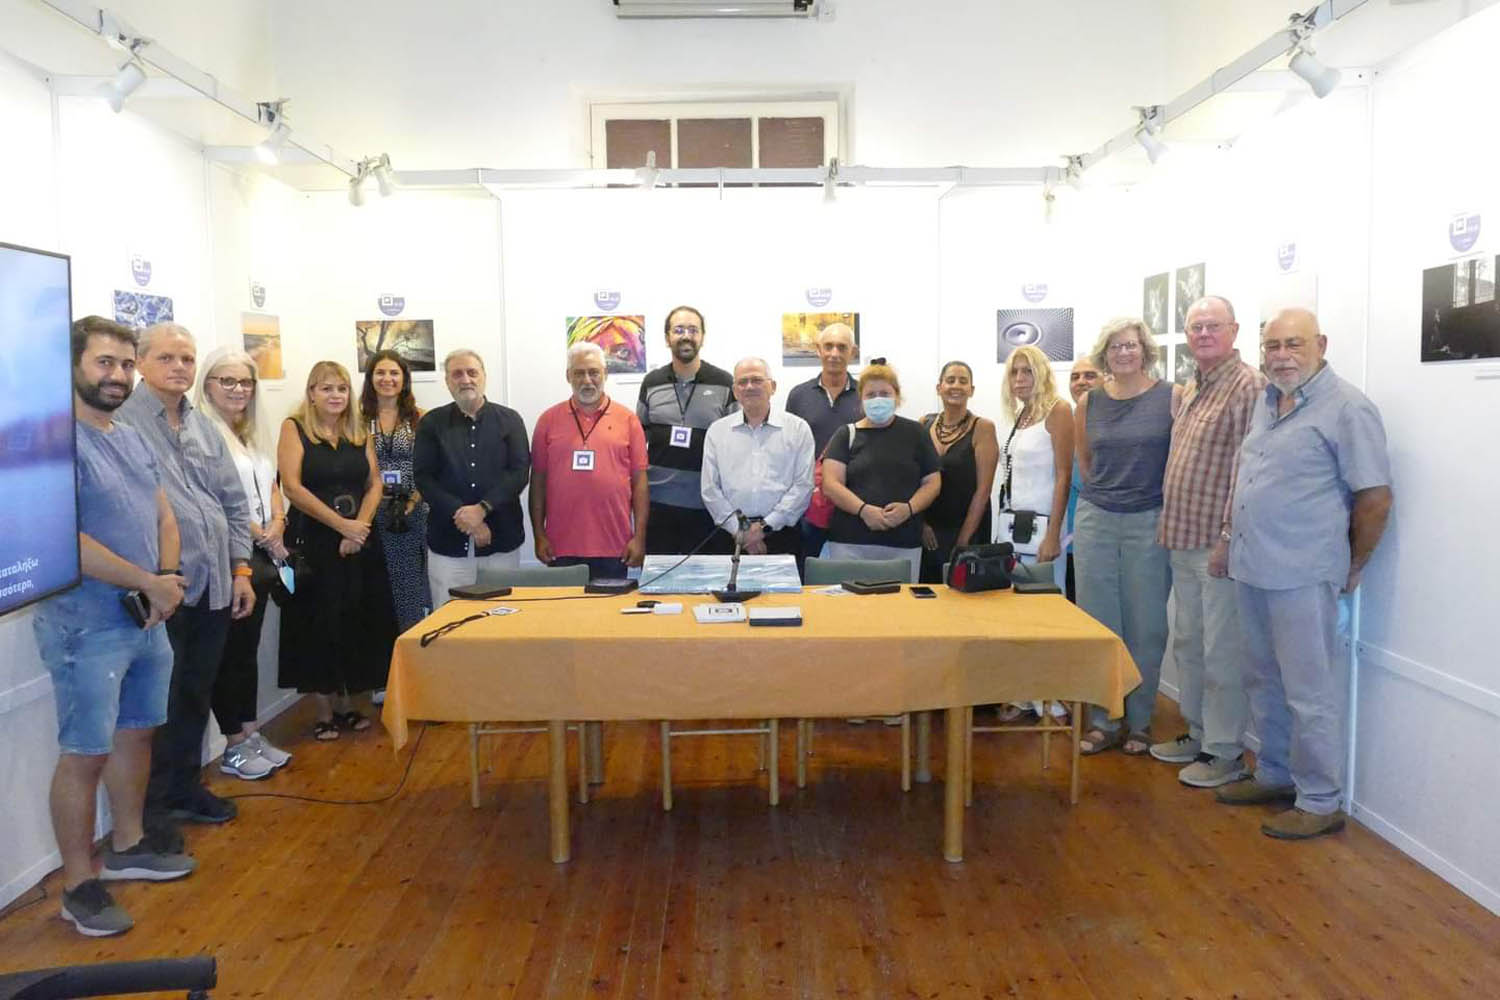 The Art of Social Media exhibition in Limassol has ended